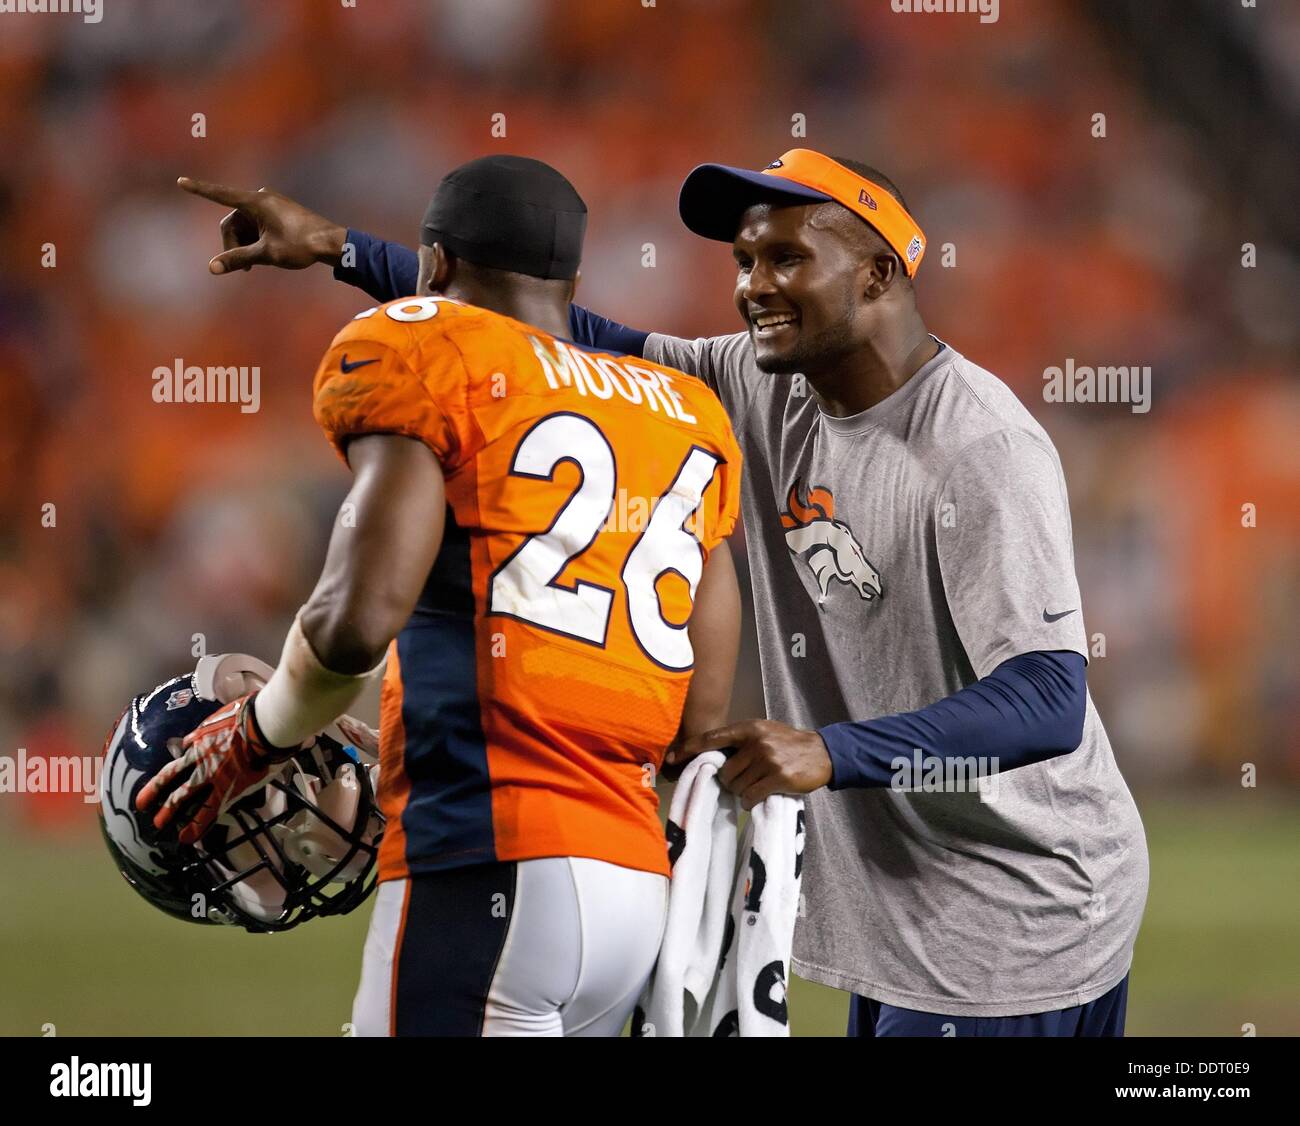 Denver, Colorado, USA. 5th Sep, 2013. Denver Broncos CB CHAMP BAILEY, right, gives direction to team mate RAHIM MOORE, left, during the 2nd. half at Sports Authority Field at Mile High Thursday night. The Broncos beat the Ravens 49-27. Credit:  Hector Acevedo/ZUMAPRESS.com/Alamy Live News Stock Photo